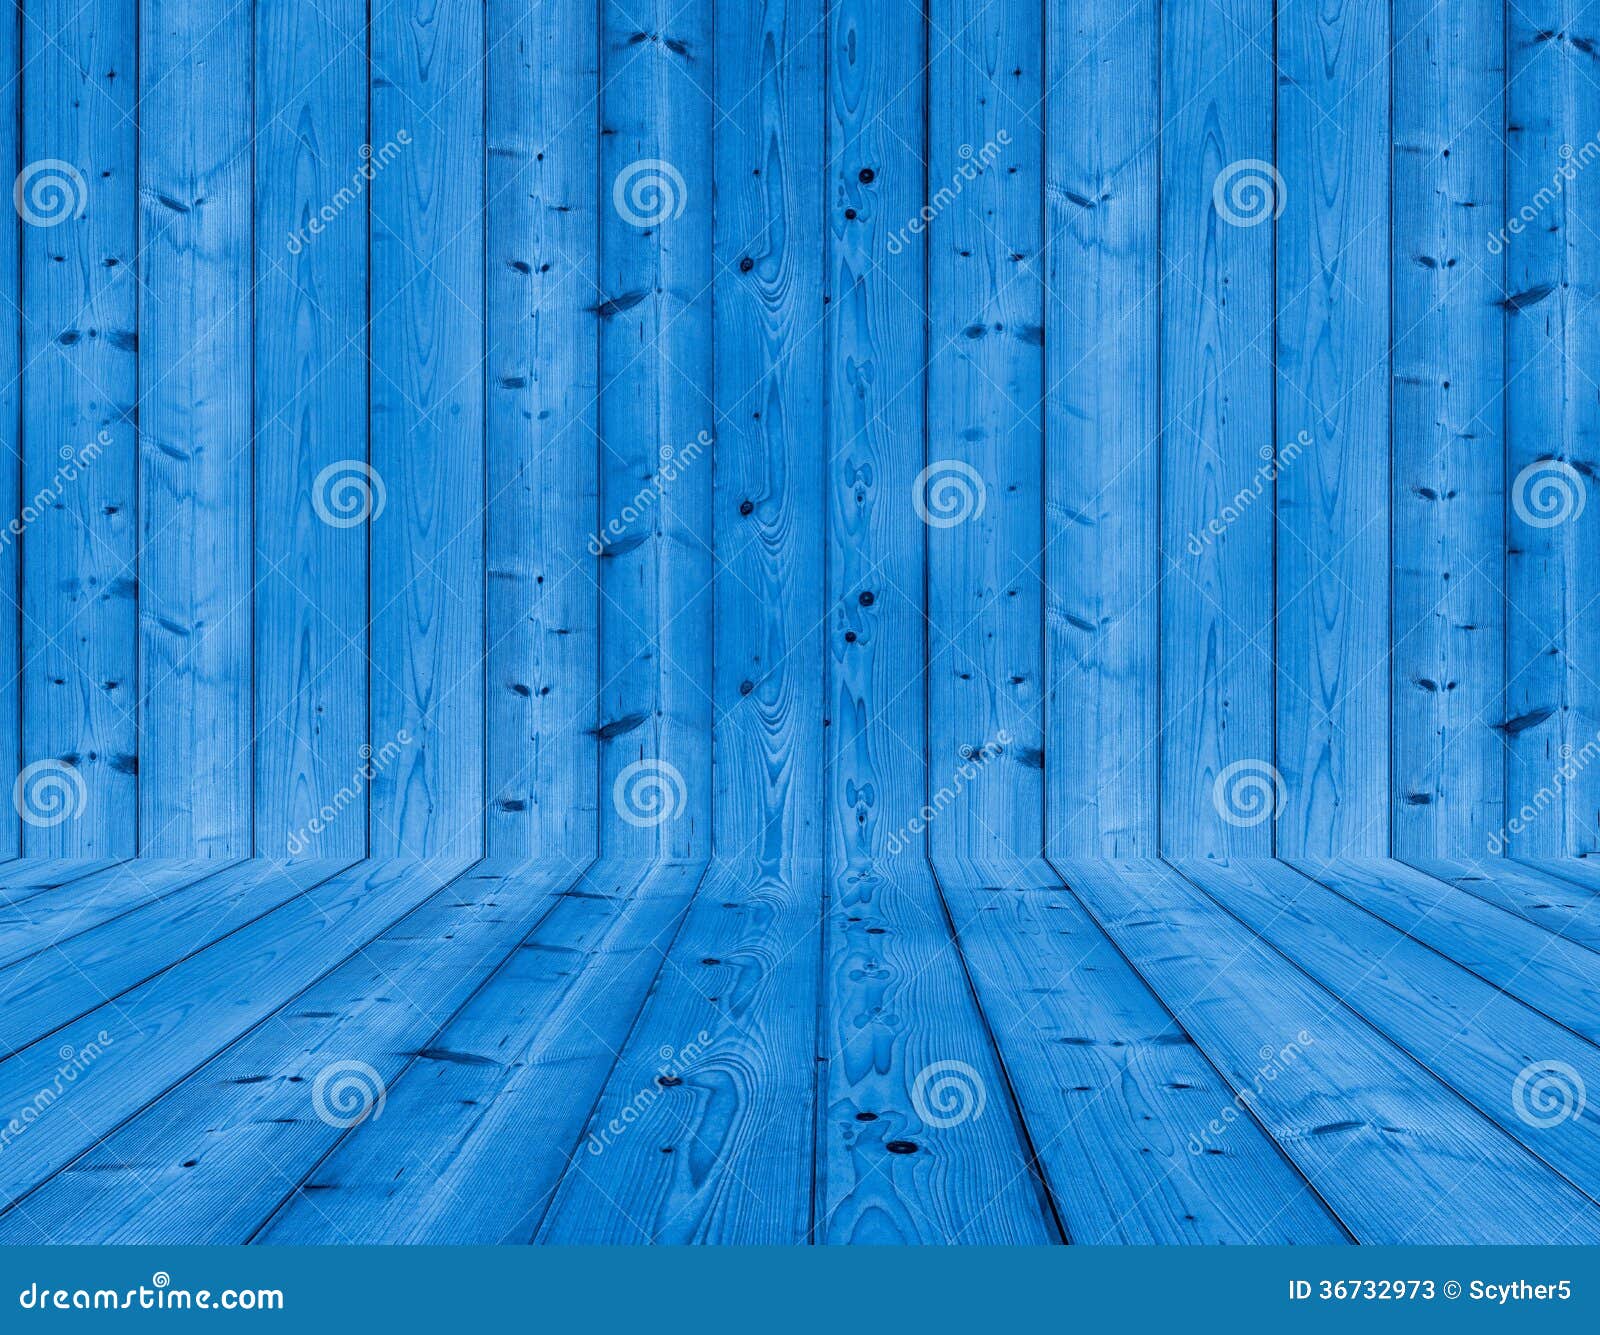 Download 106+ Background High Quality Blue Terbaik